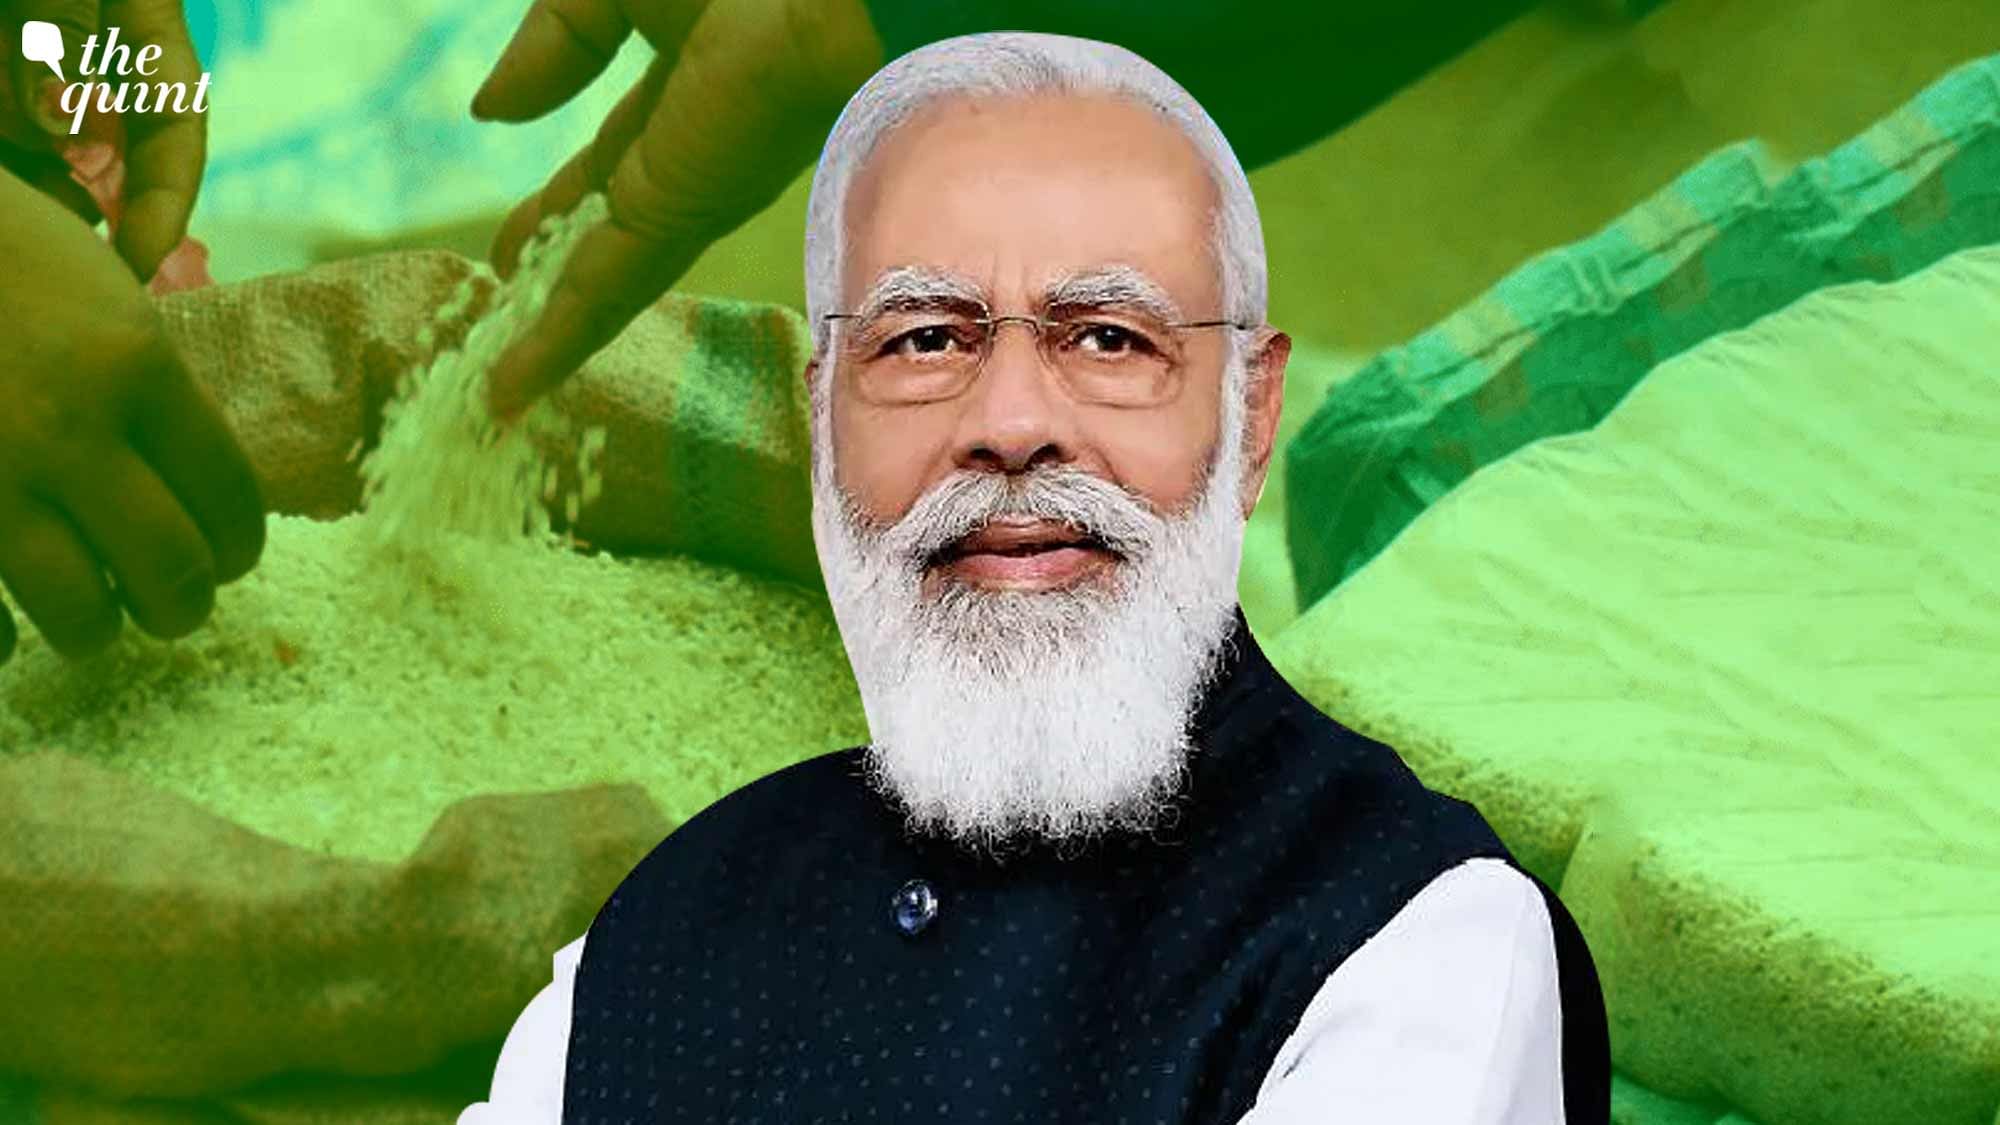 <div class="paragraphs"><p>Faring beyond 'pro-vote', solving hunger issue among the poor must precede Modi govt’s welfare politics before 2024.</p></div>